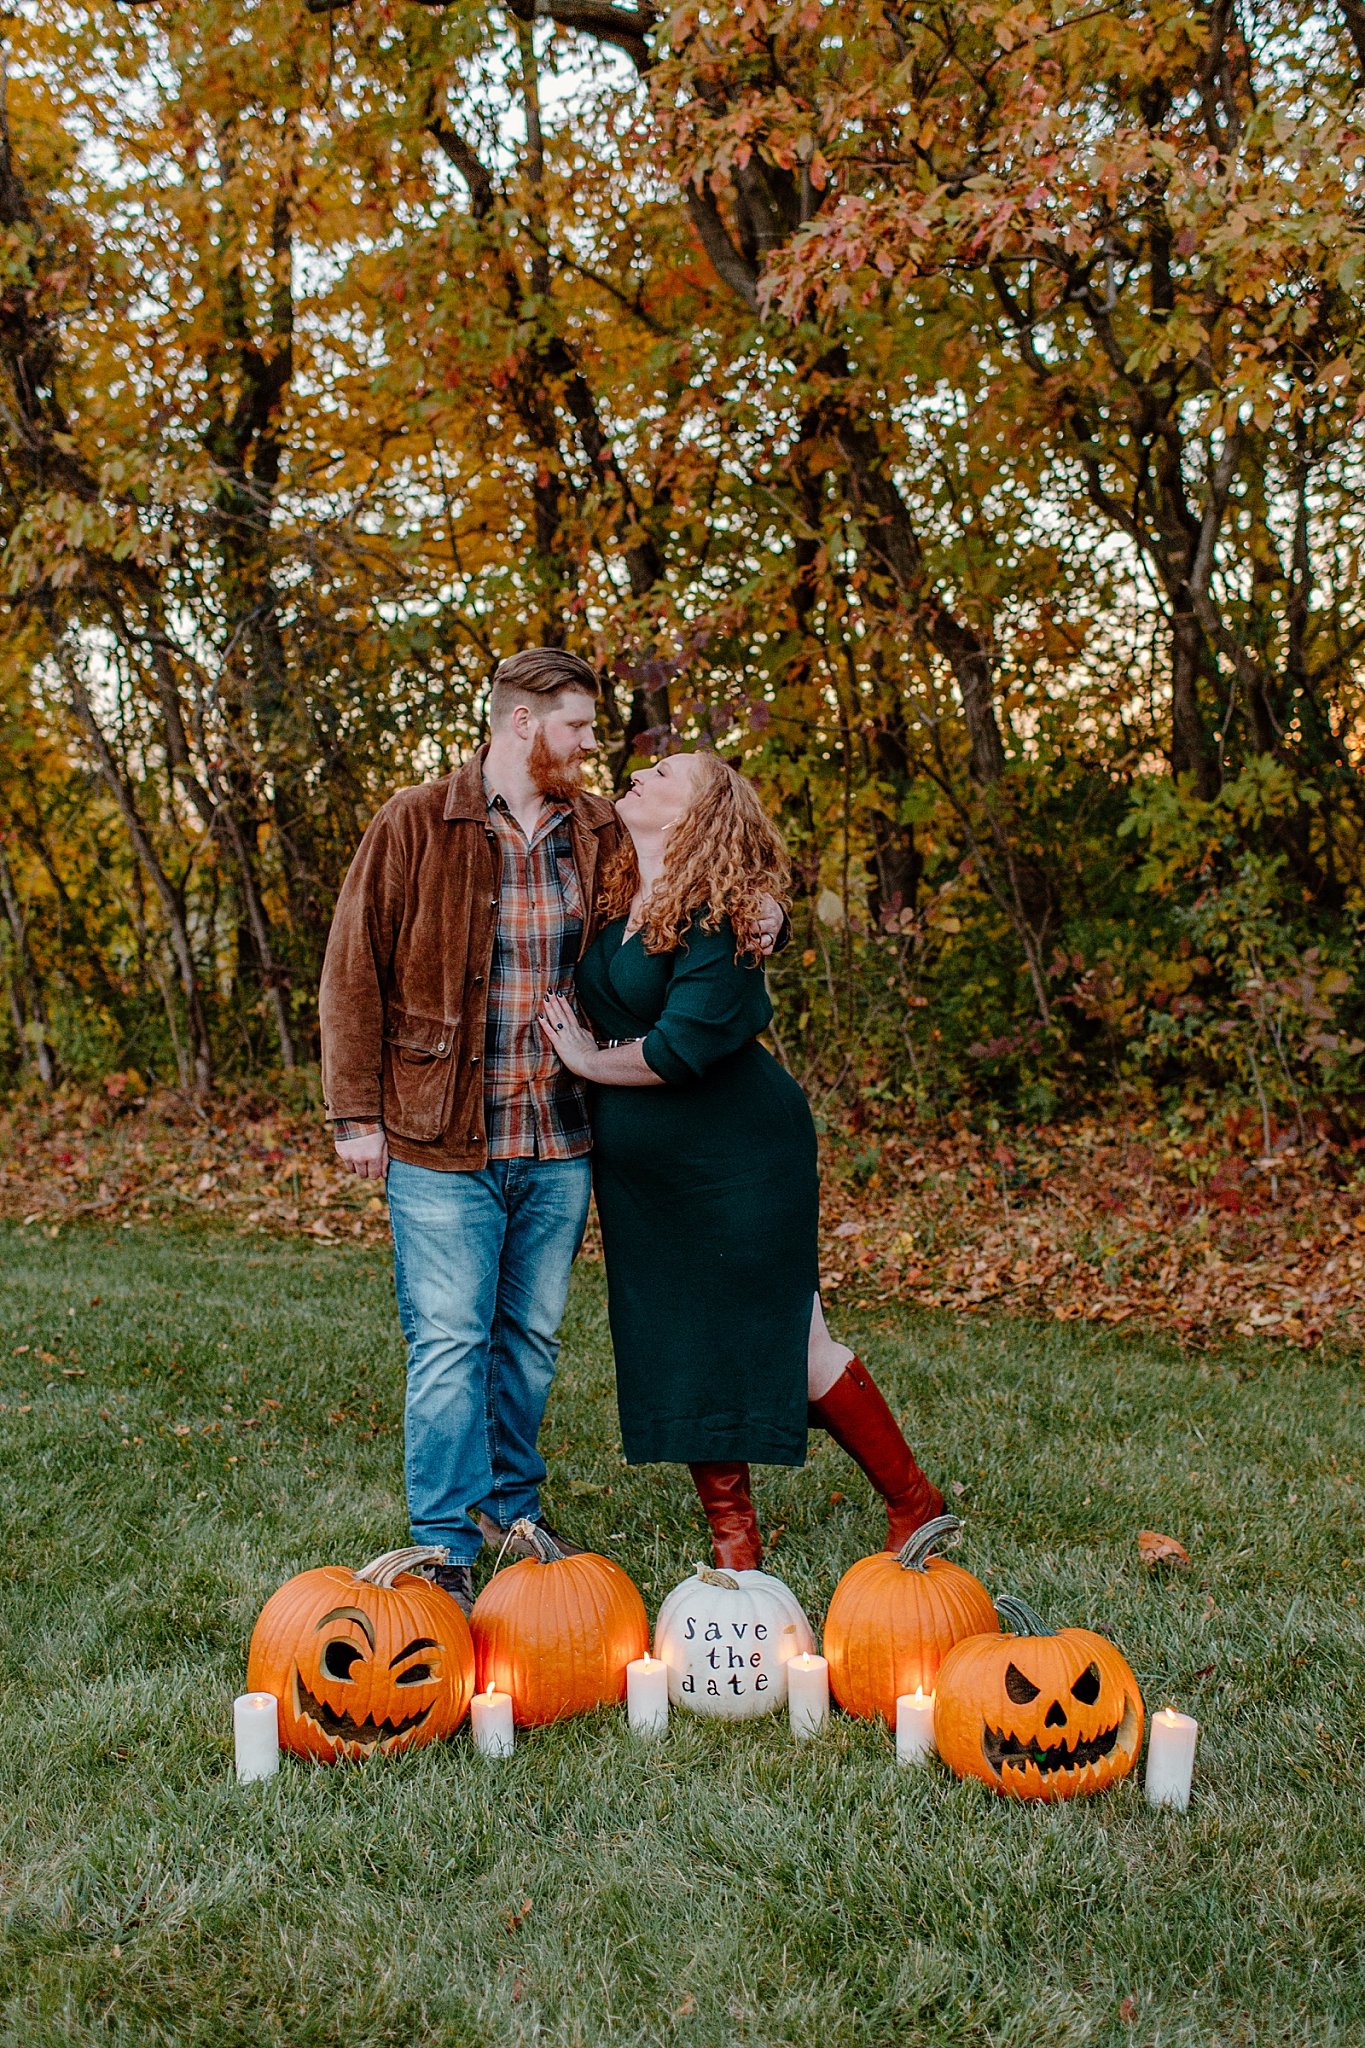  Man and woman kiss standing behind pumpkins at Halloween engagement session 